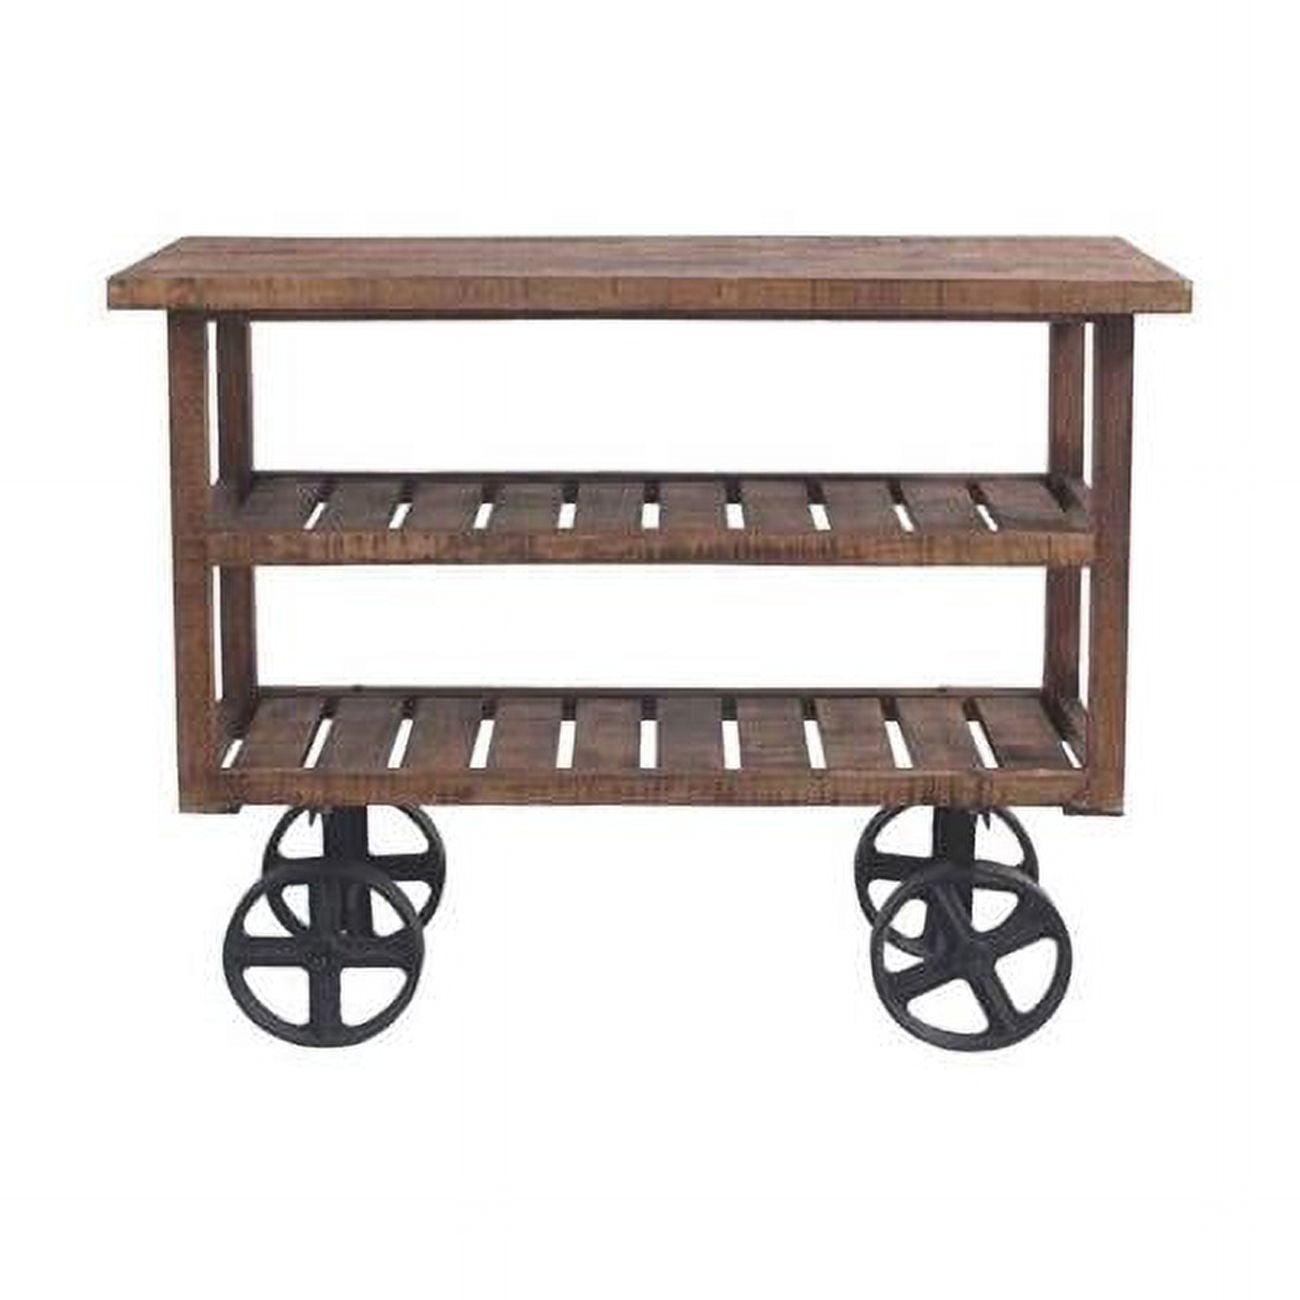 Rustic Industrial Mango Wood Console on Cast Iron Wheels with Storage